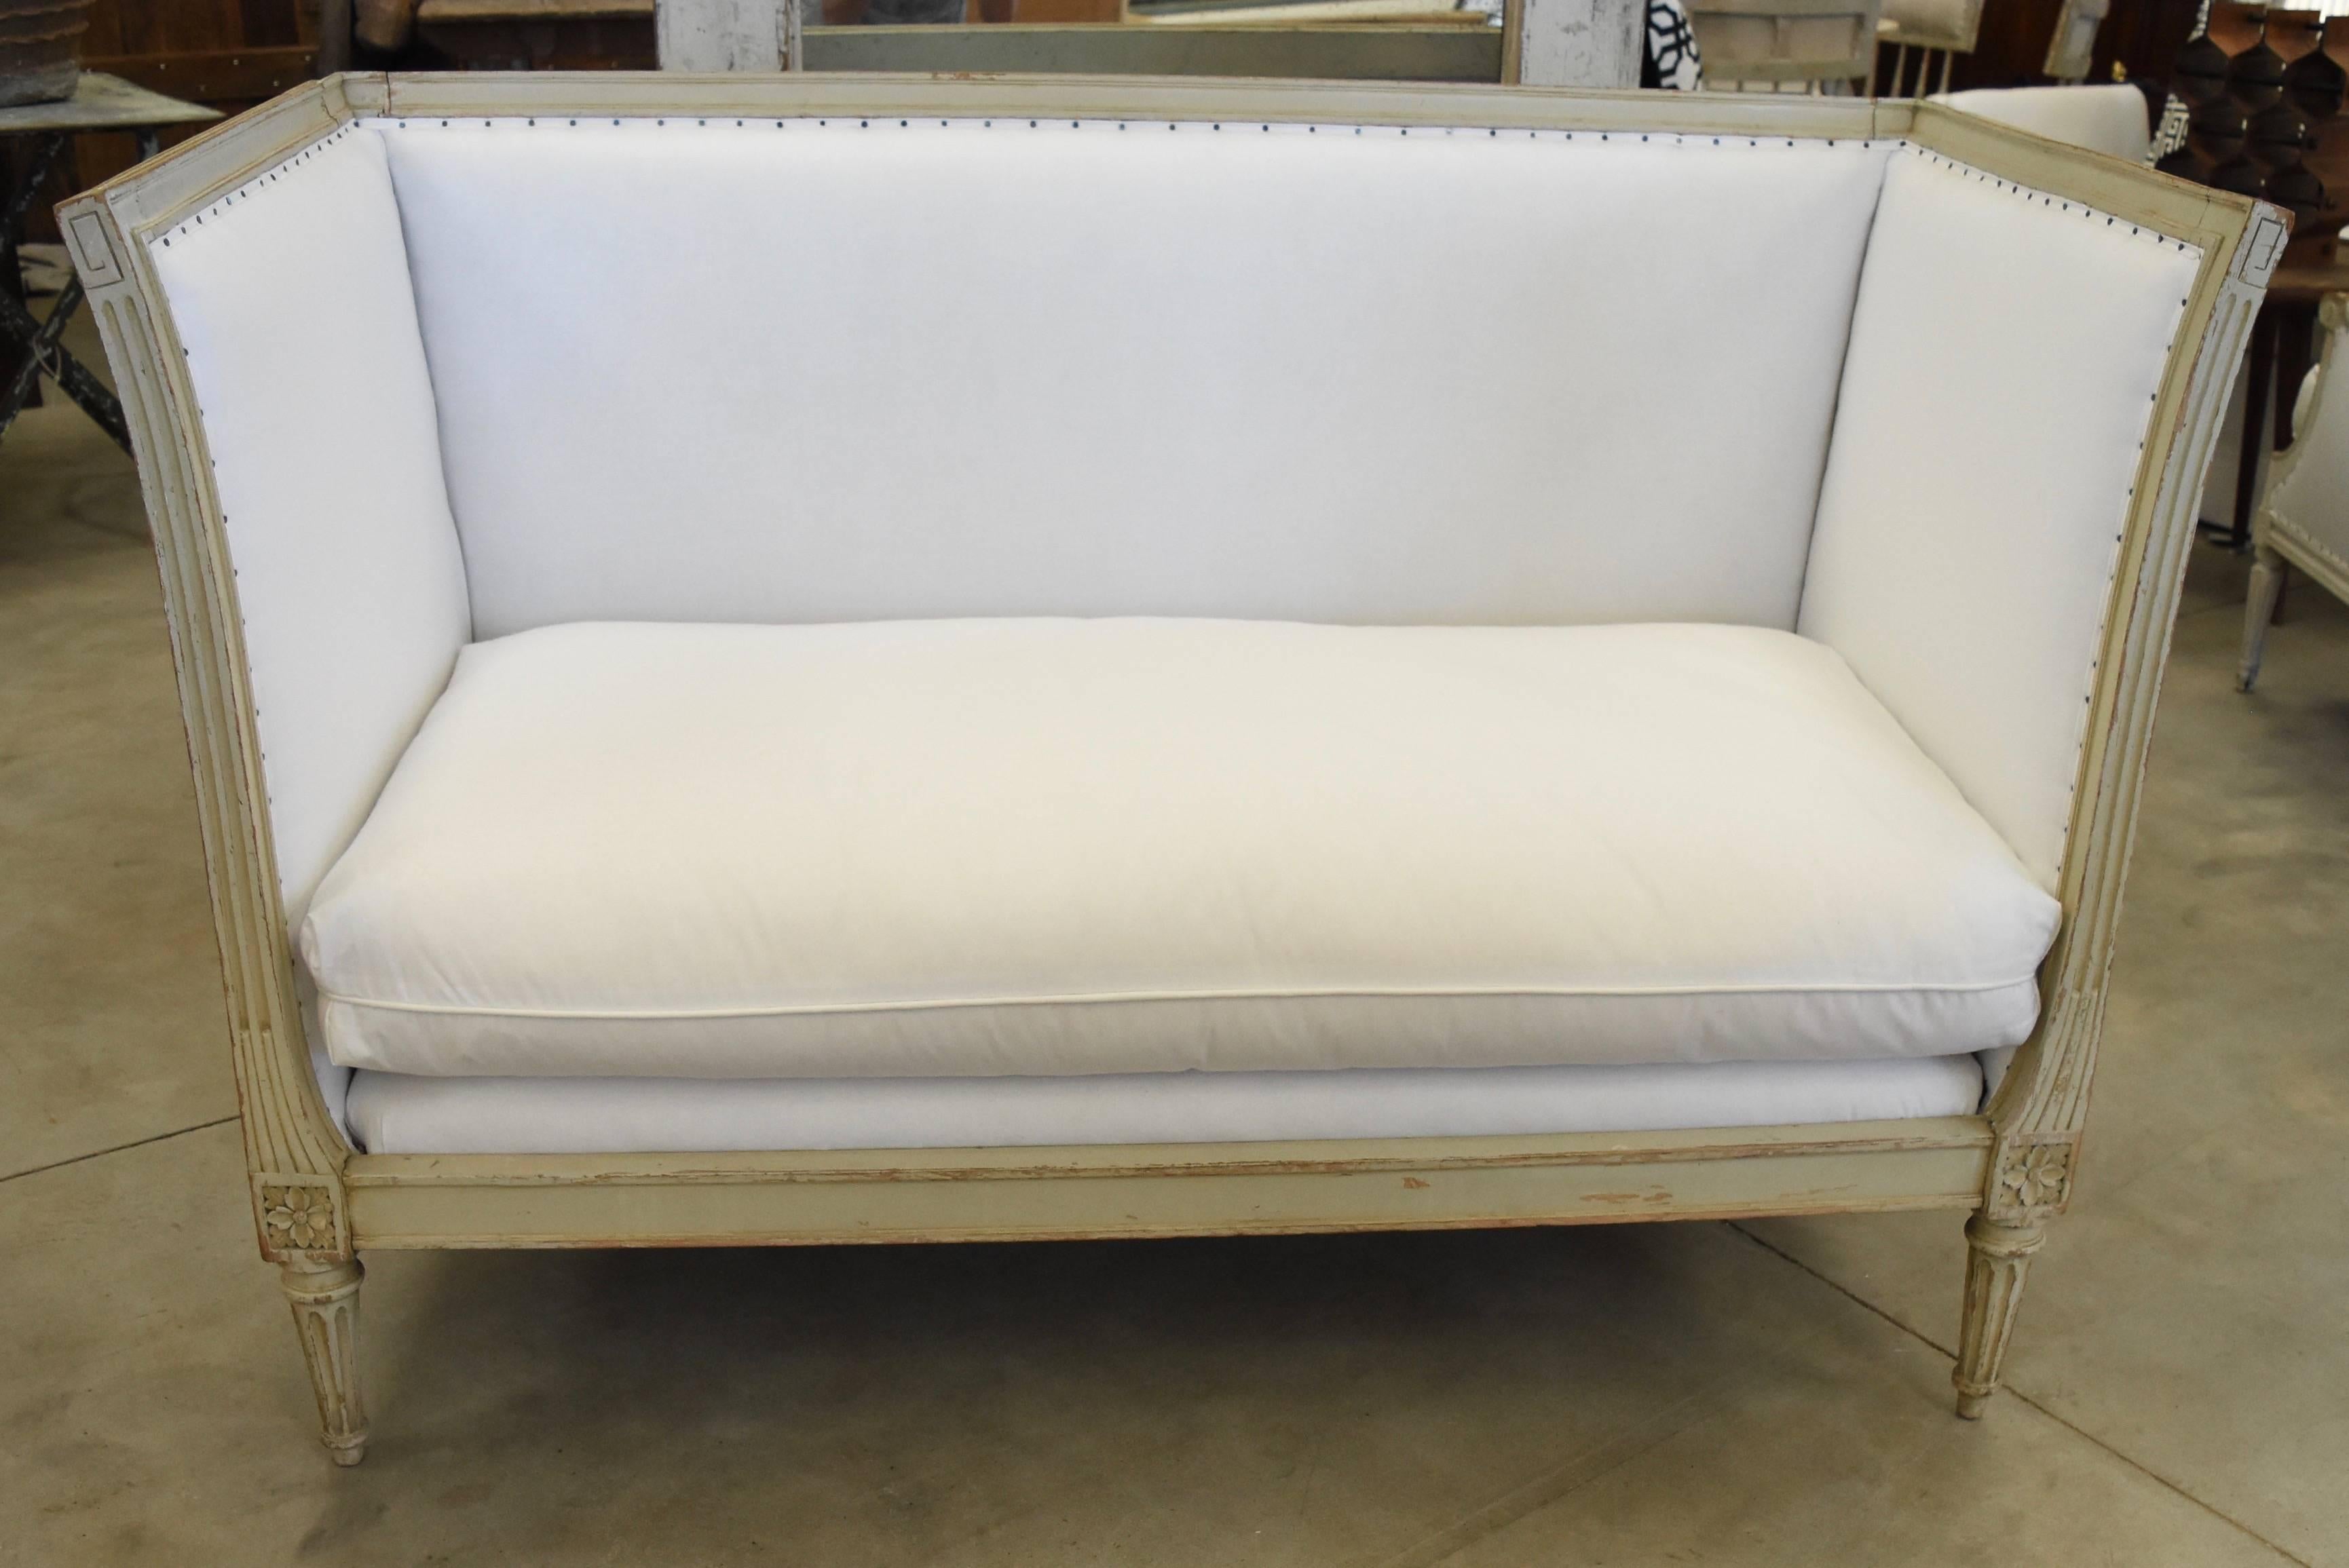 This super chic Napoleon settee from France has been newly upholstered in muslin and has a single down filled cushion. It's modern clean lines go in any decor.